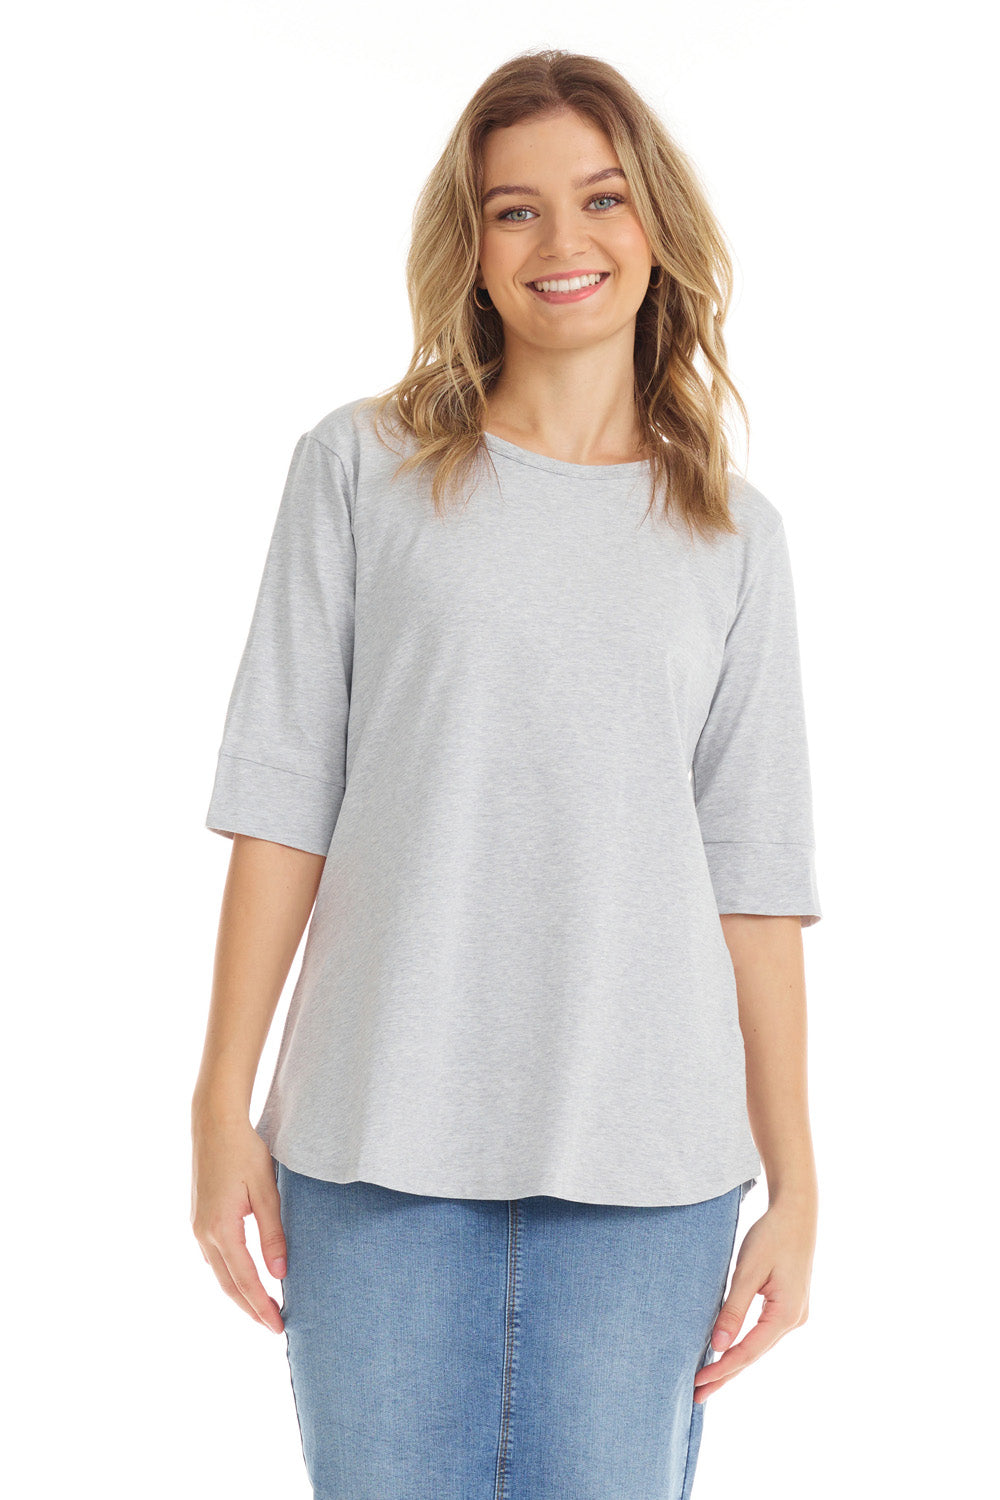 light gray cotton elbow sleeve shirt with cuff sleeve